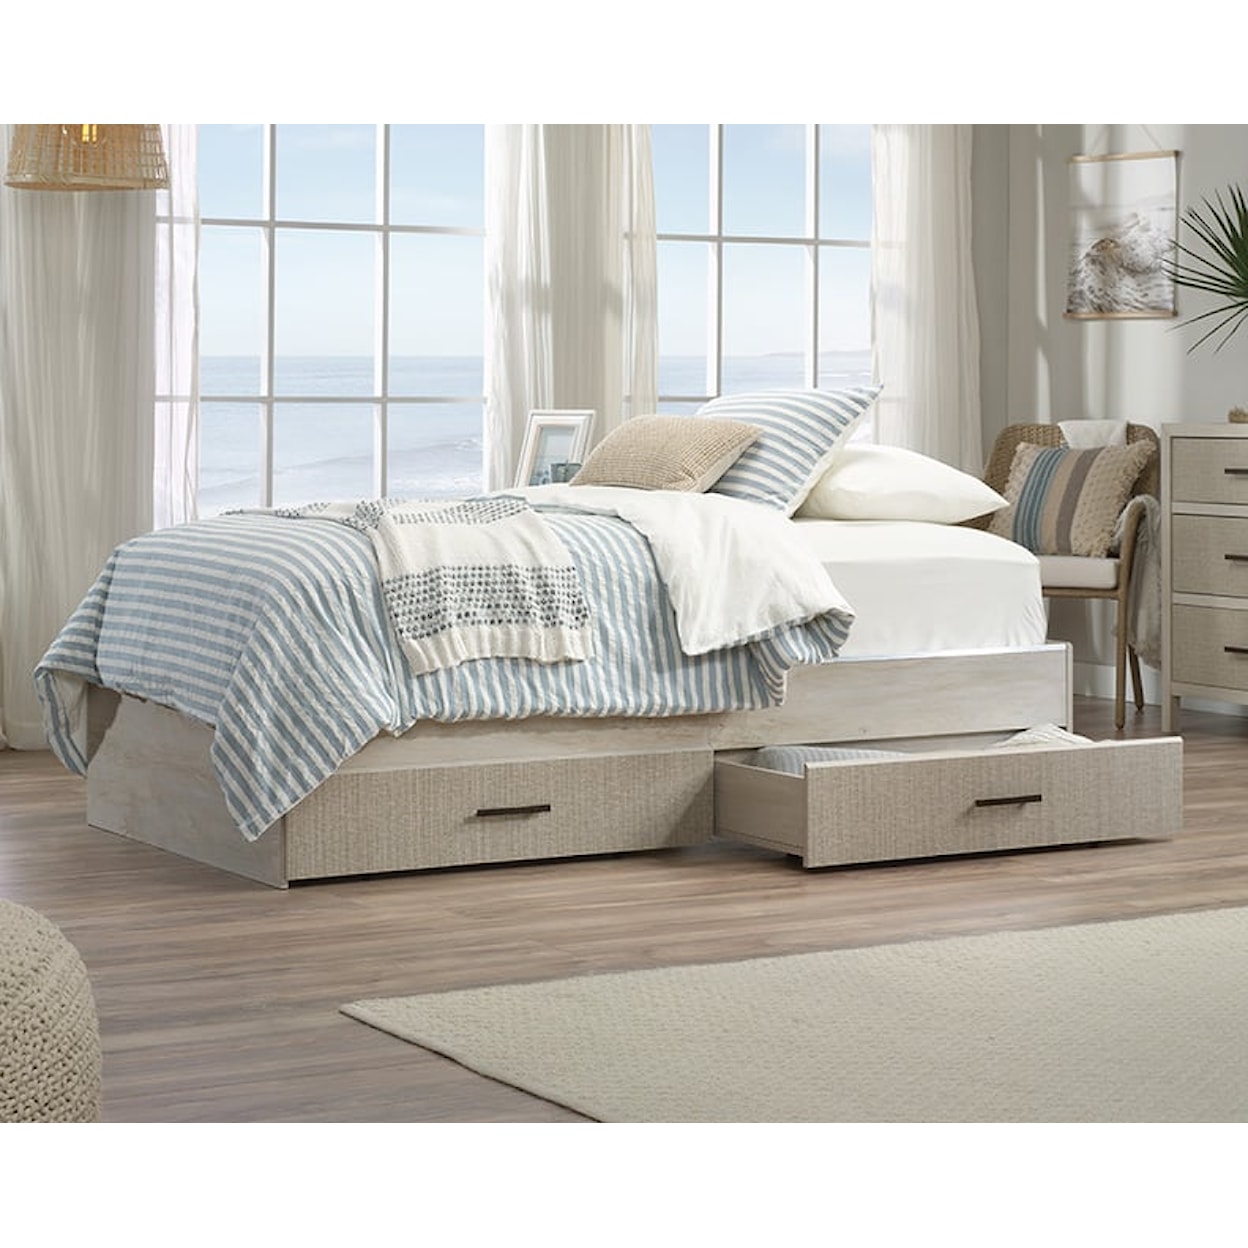 Sauder Pacific View Twin Bed Frame